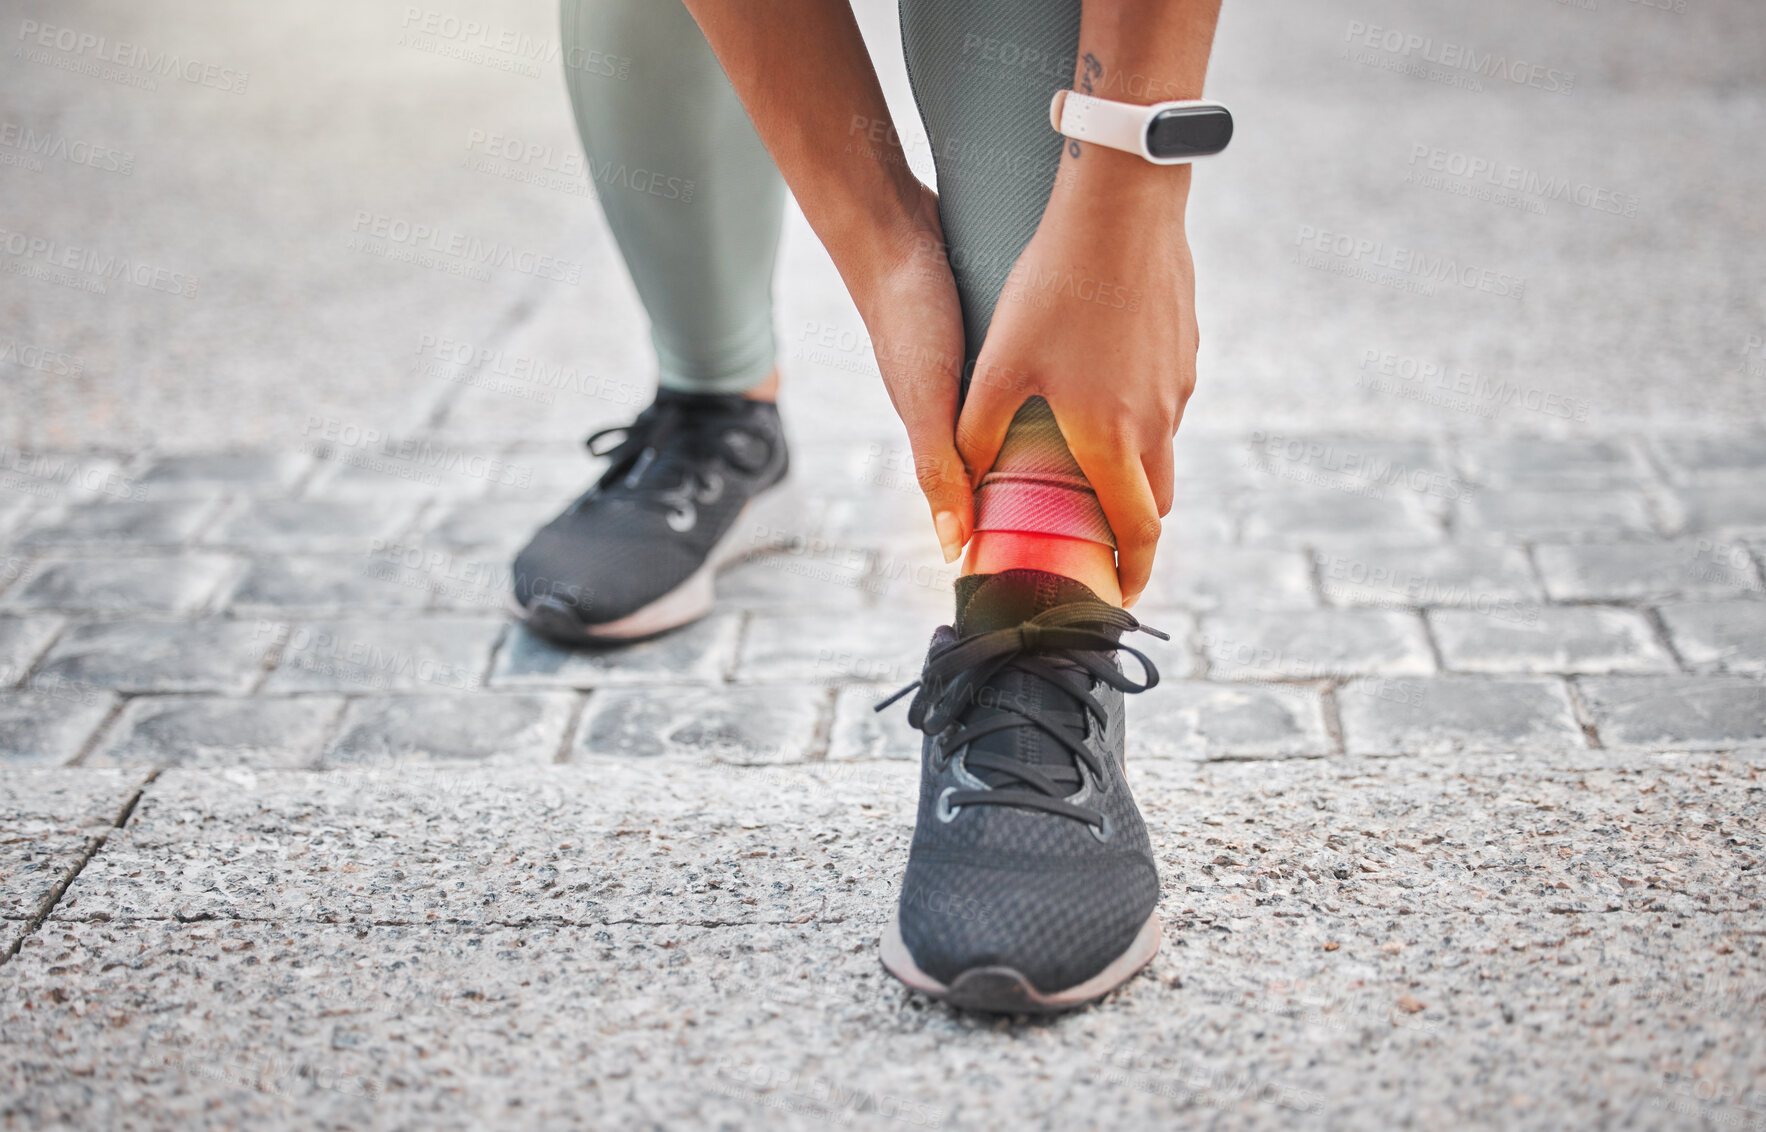 Buy stock photo Close up of a active woman with ankle twist or sprain injury during a workout or while running outdoors. Woman wearing smart watch and holding her leg in pain after hurting her ankle during exercise